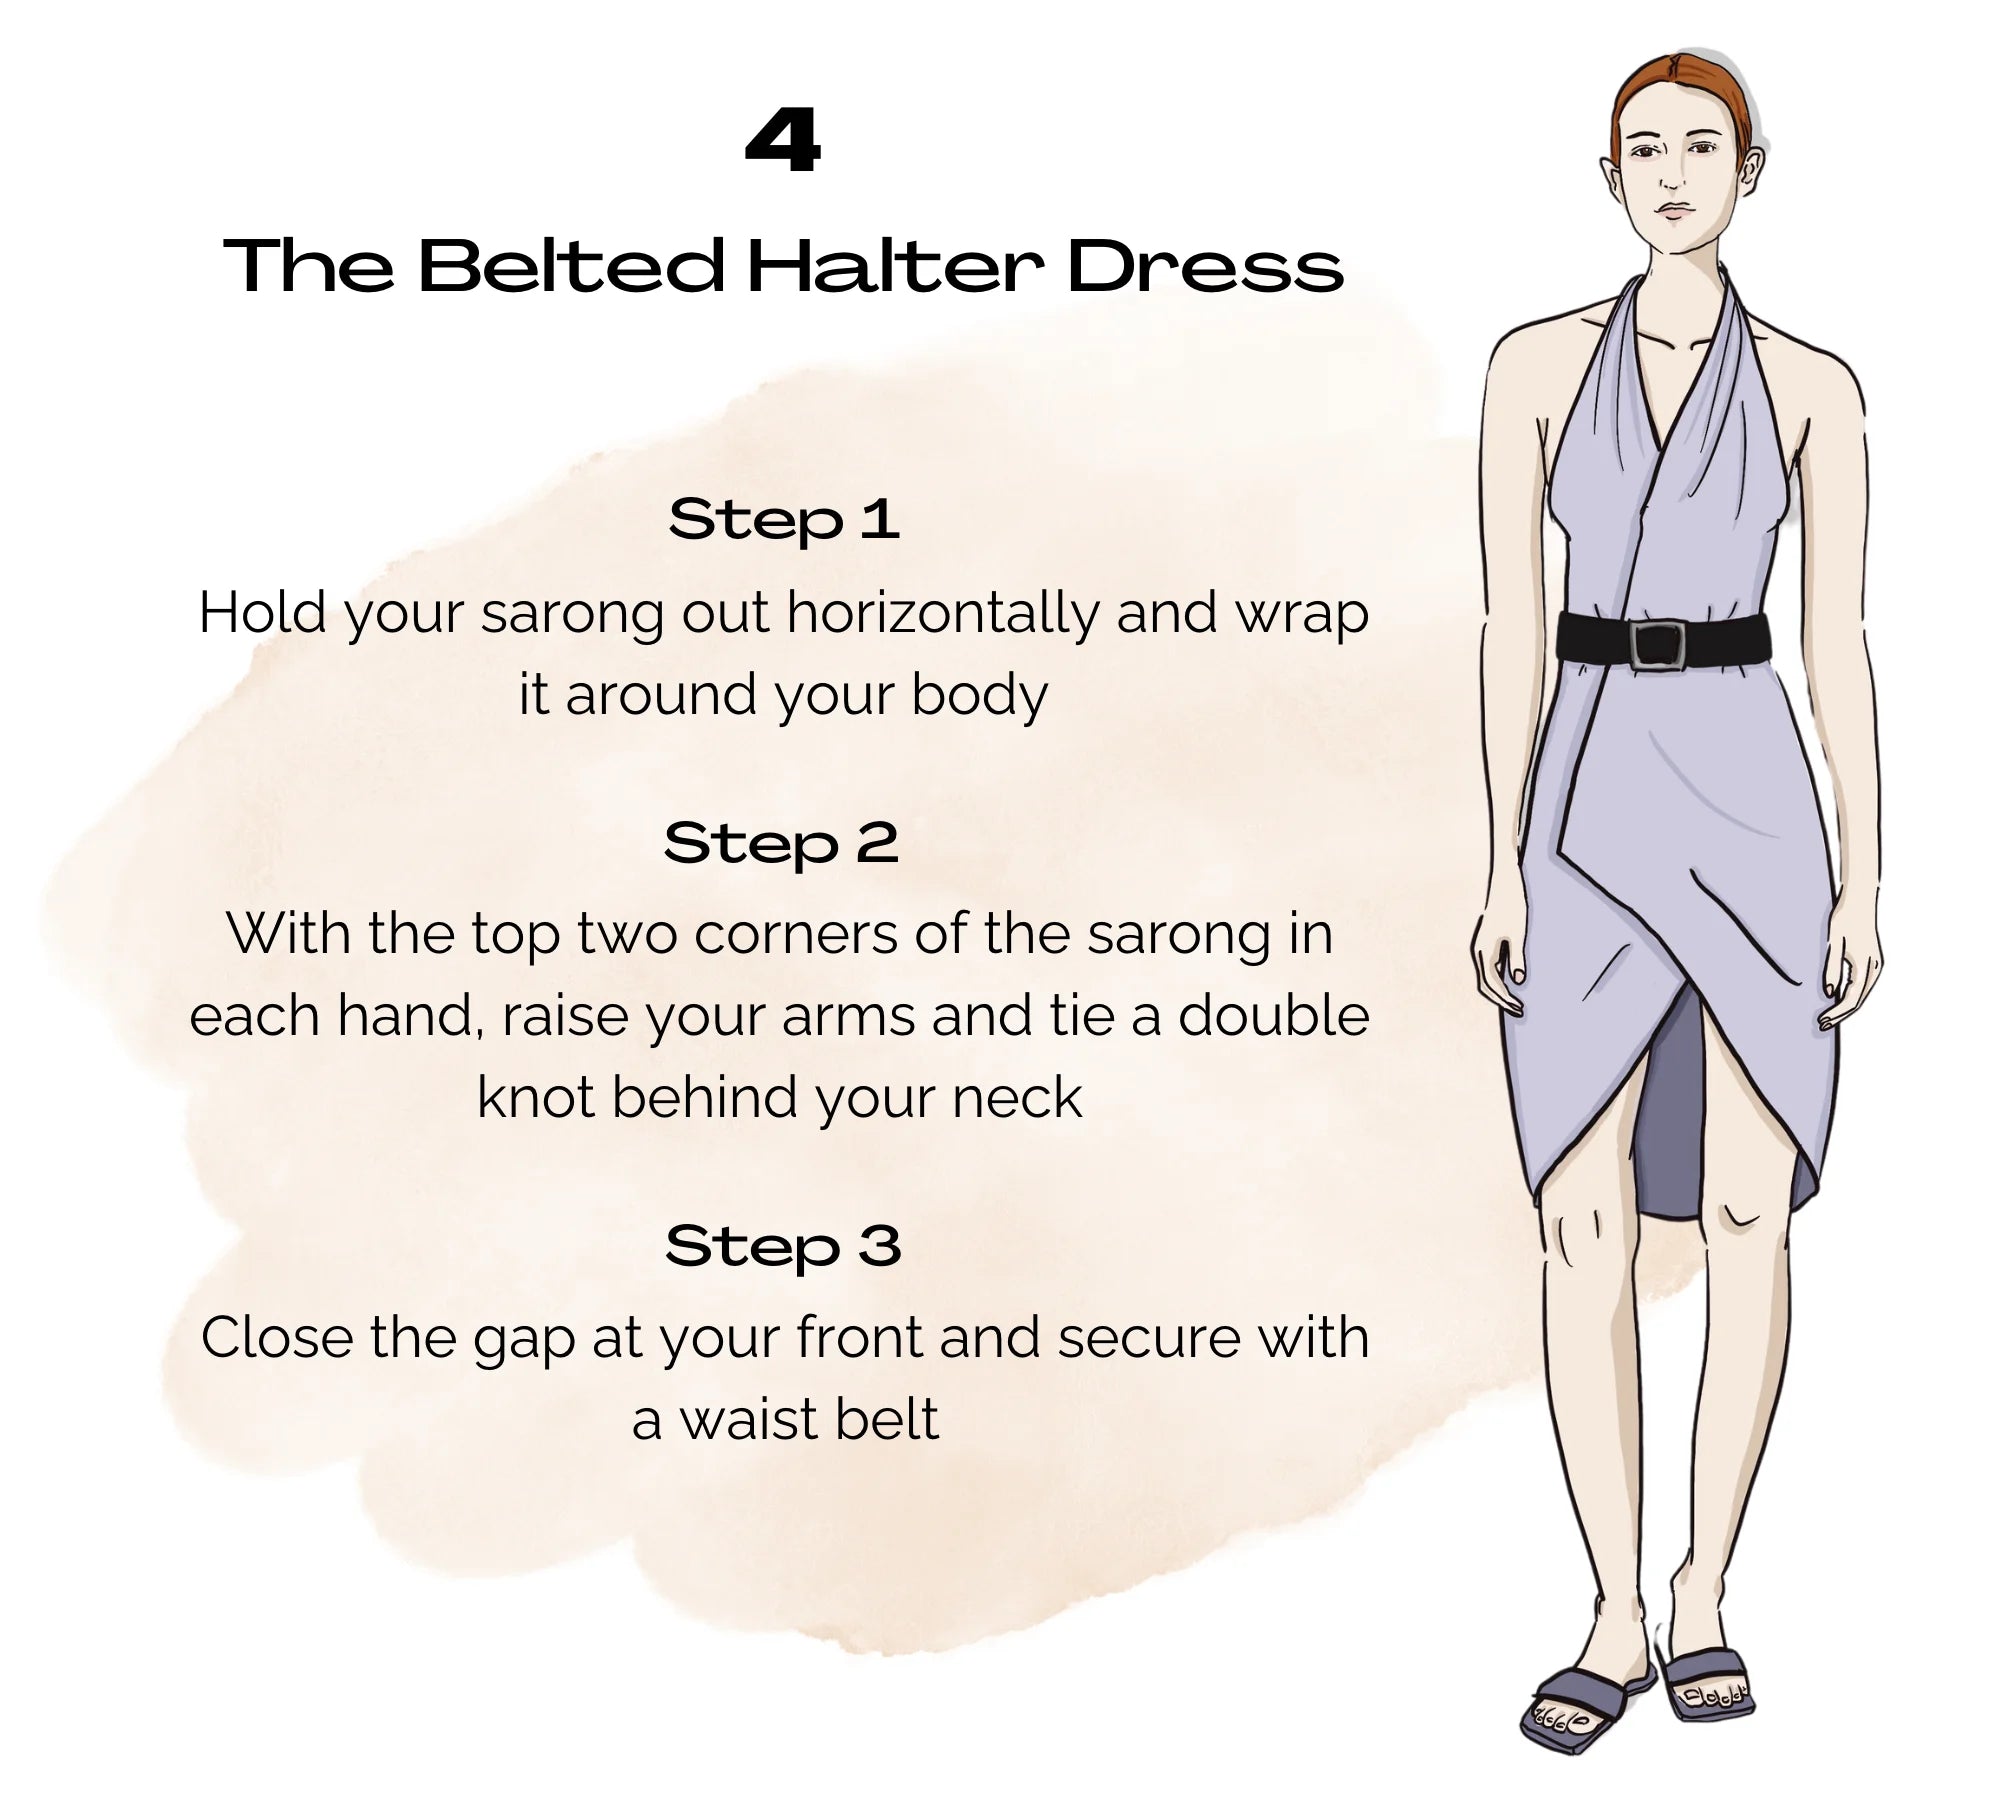 Sarong style 4: The belted halter dress